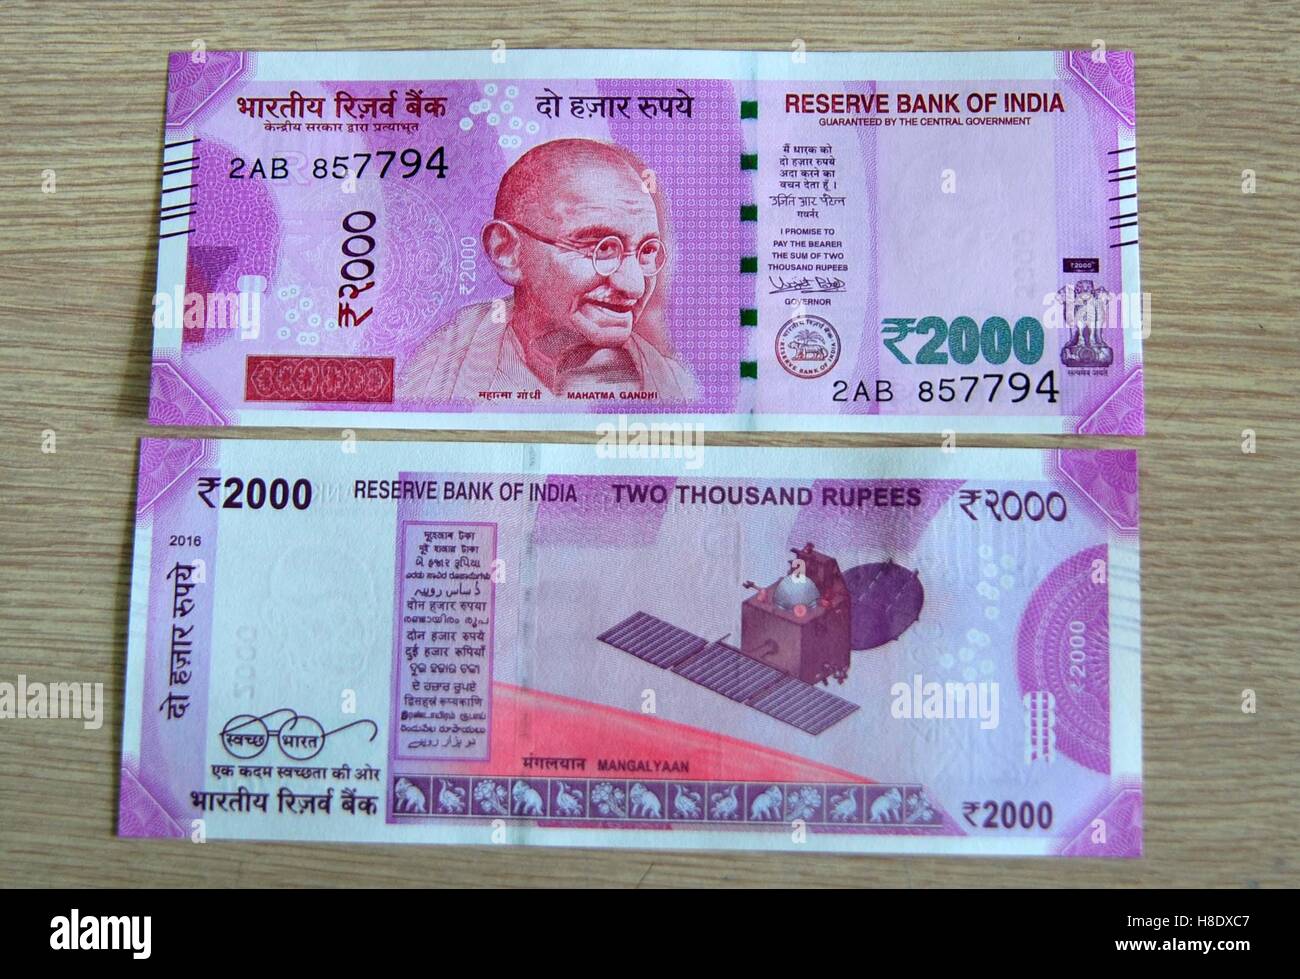 Allahabad, uttar pradesh, India. 12th Nov, 2016. Allahabad: A view of newly launched 2000 rupee currency notes in Allahabad on 12-11-2016. photo by prabhat kumar verma © Prabhat Kumar Verma/ZUMA Wire/Alamy Live News Stock Photo